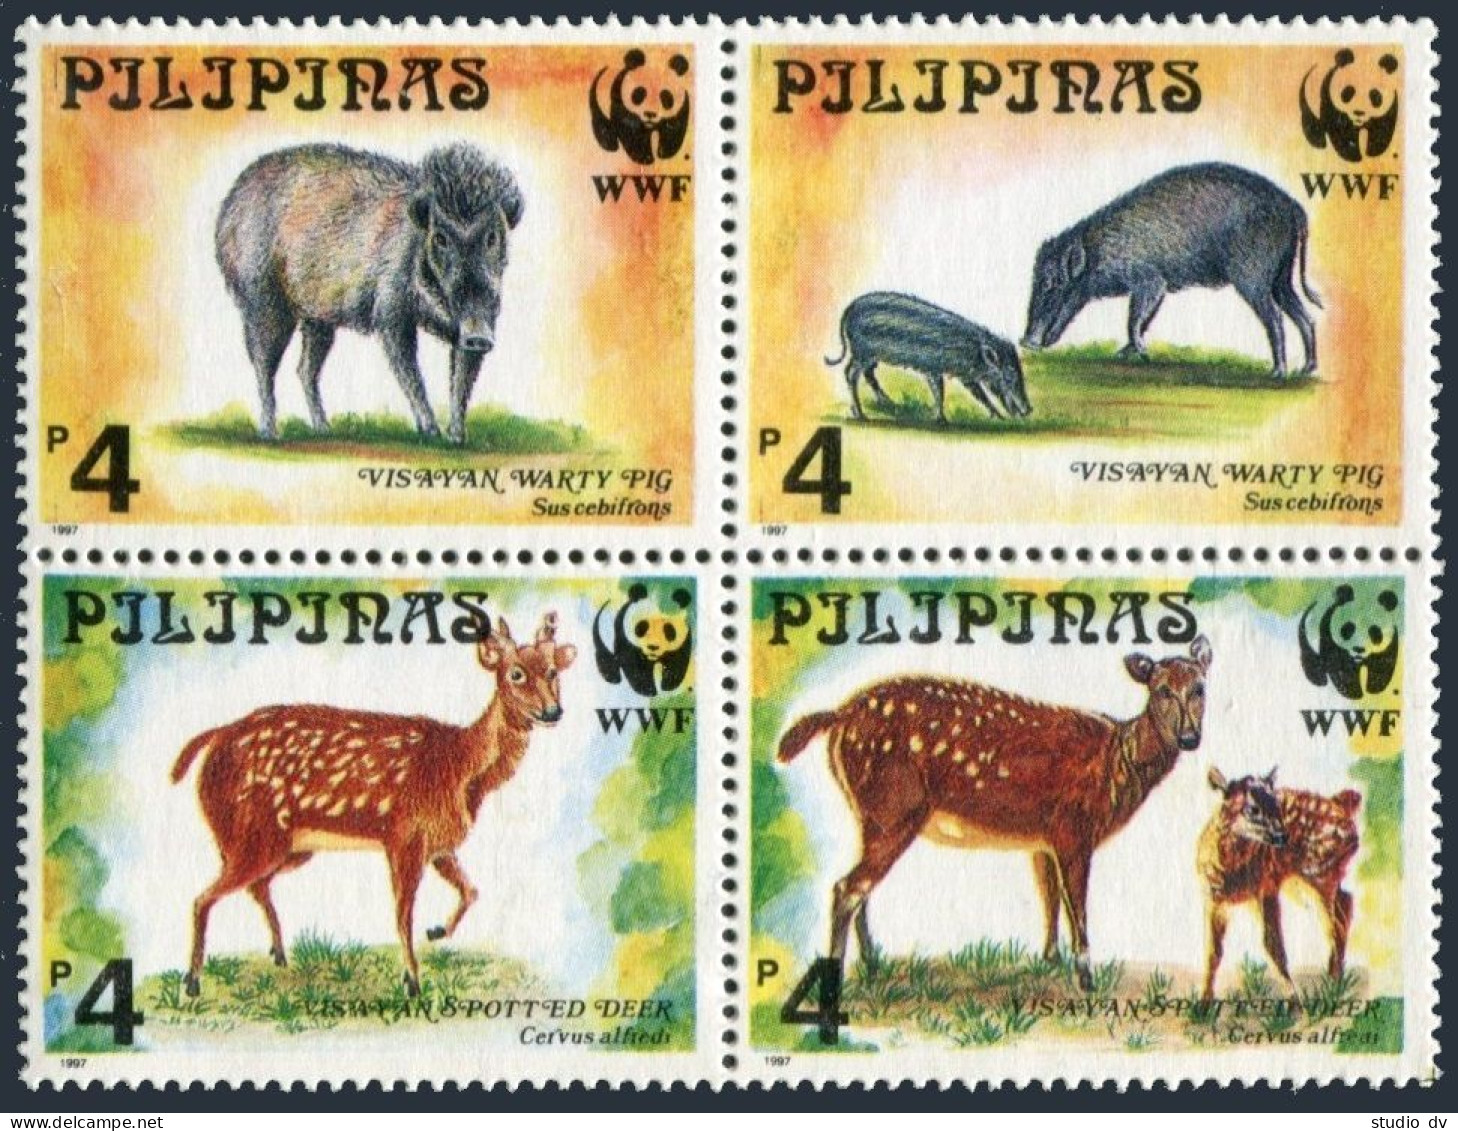 Philippines 2476-2479b Block,MNH. WWF 1997.Visayan Spotted Deer,Warty Pig. - Philippines